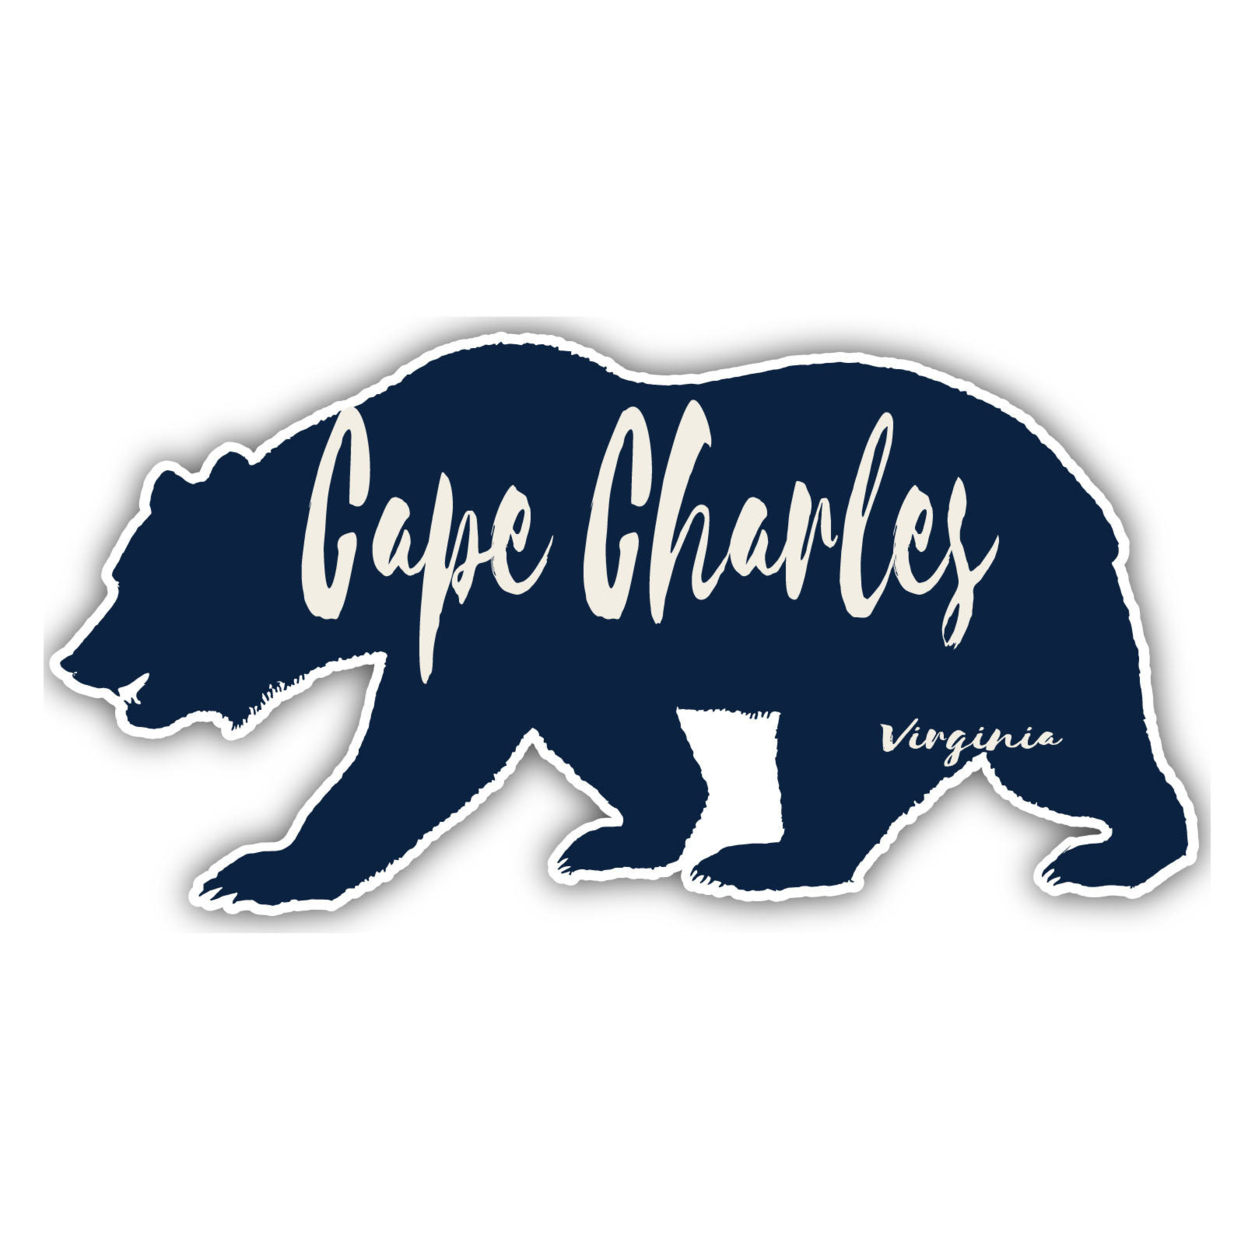 Cape Charles Virginia Souvenir Decorative Stickers (Choose Theme And Size) - 4-Pack, 8-Inch, Tent